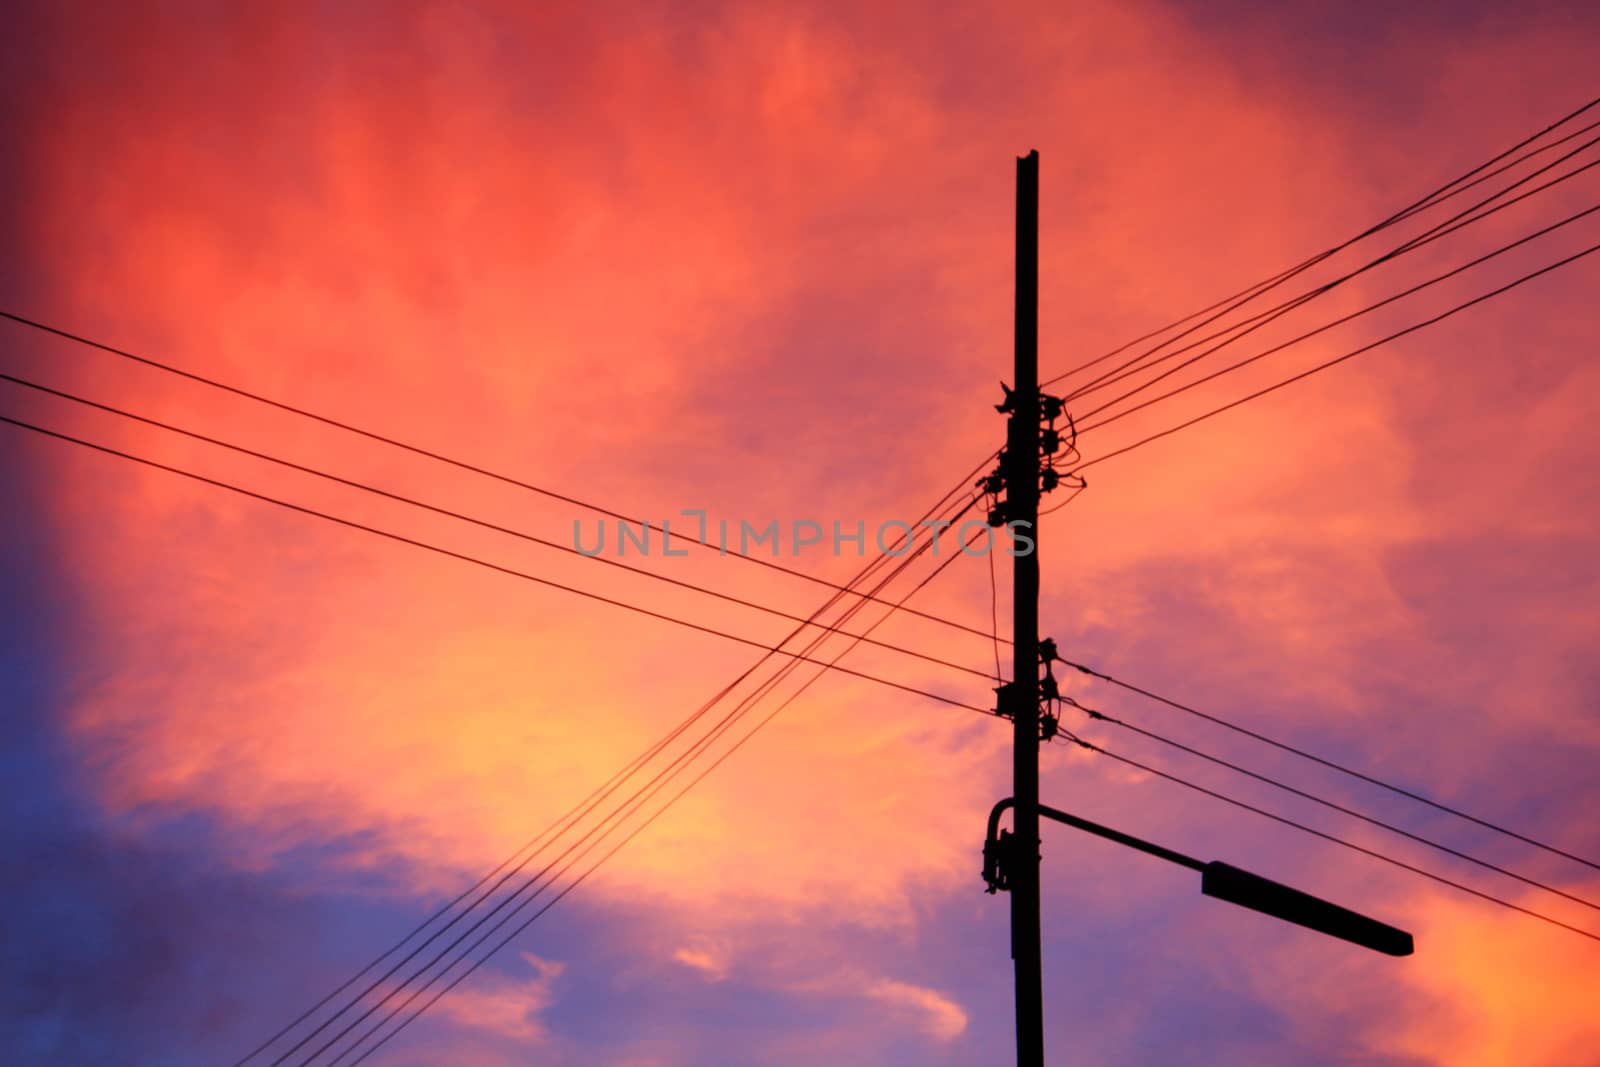 Sunset in Thailand and electricity pole